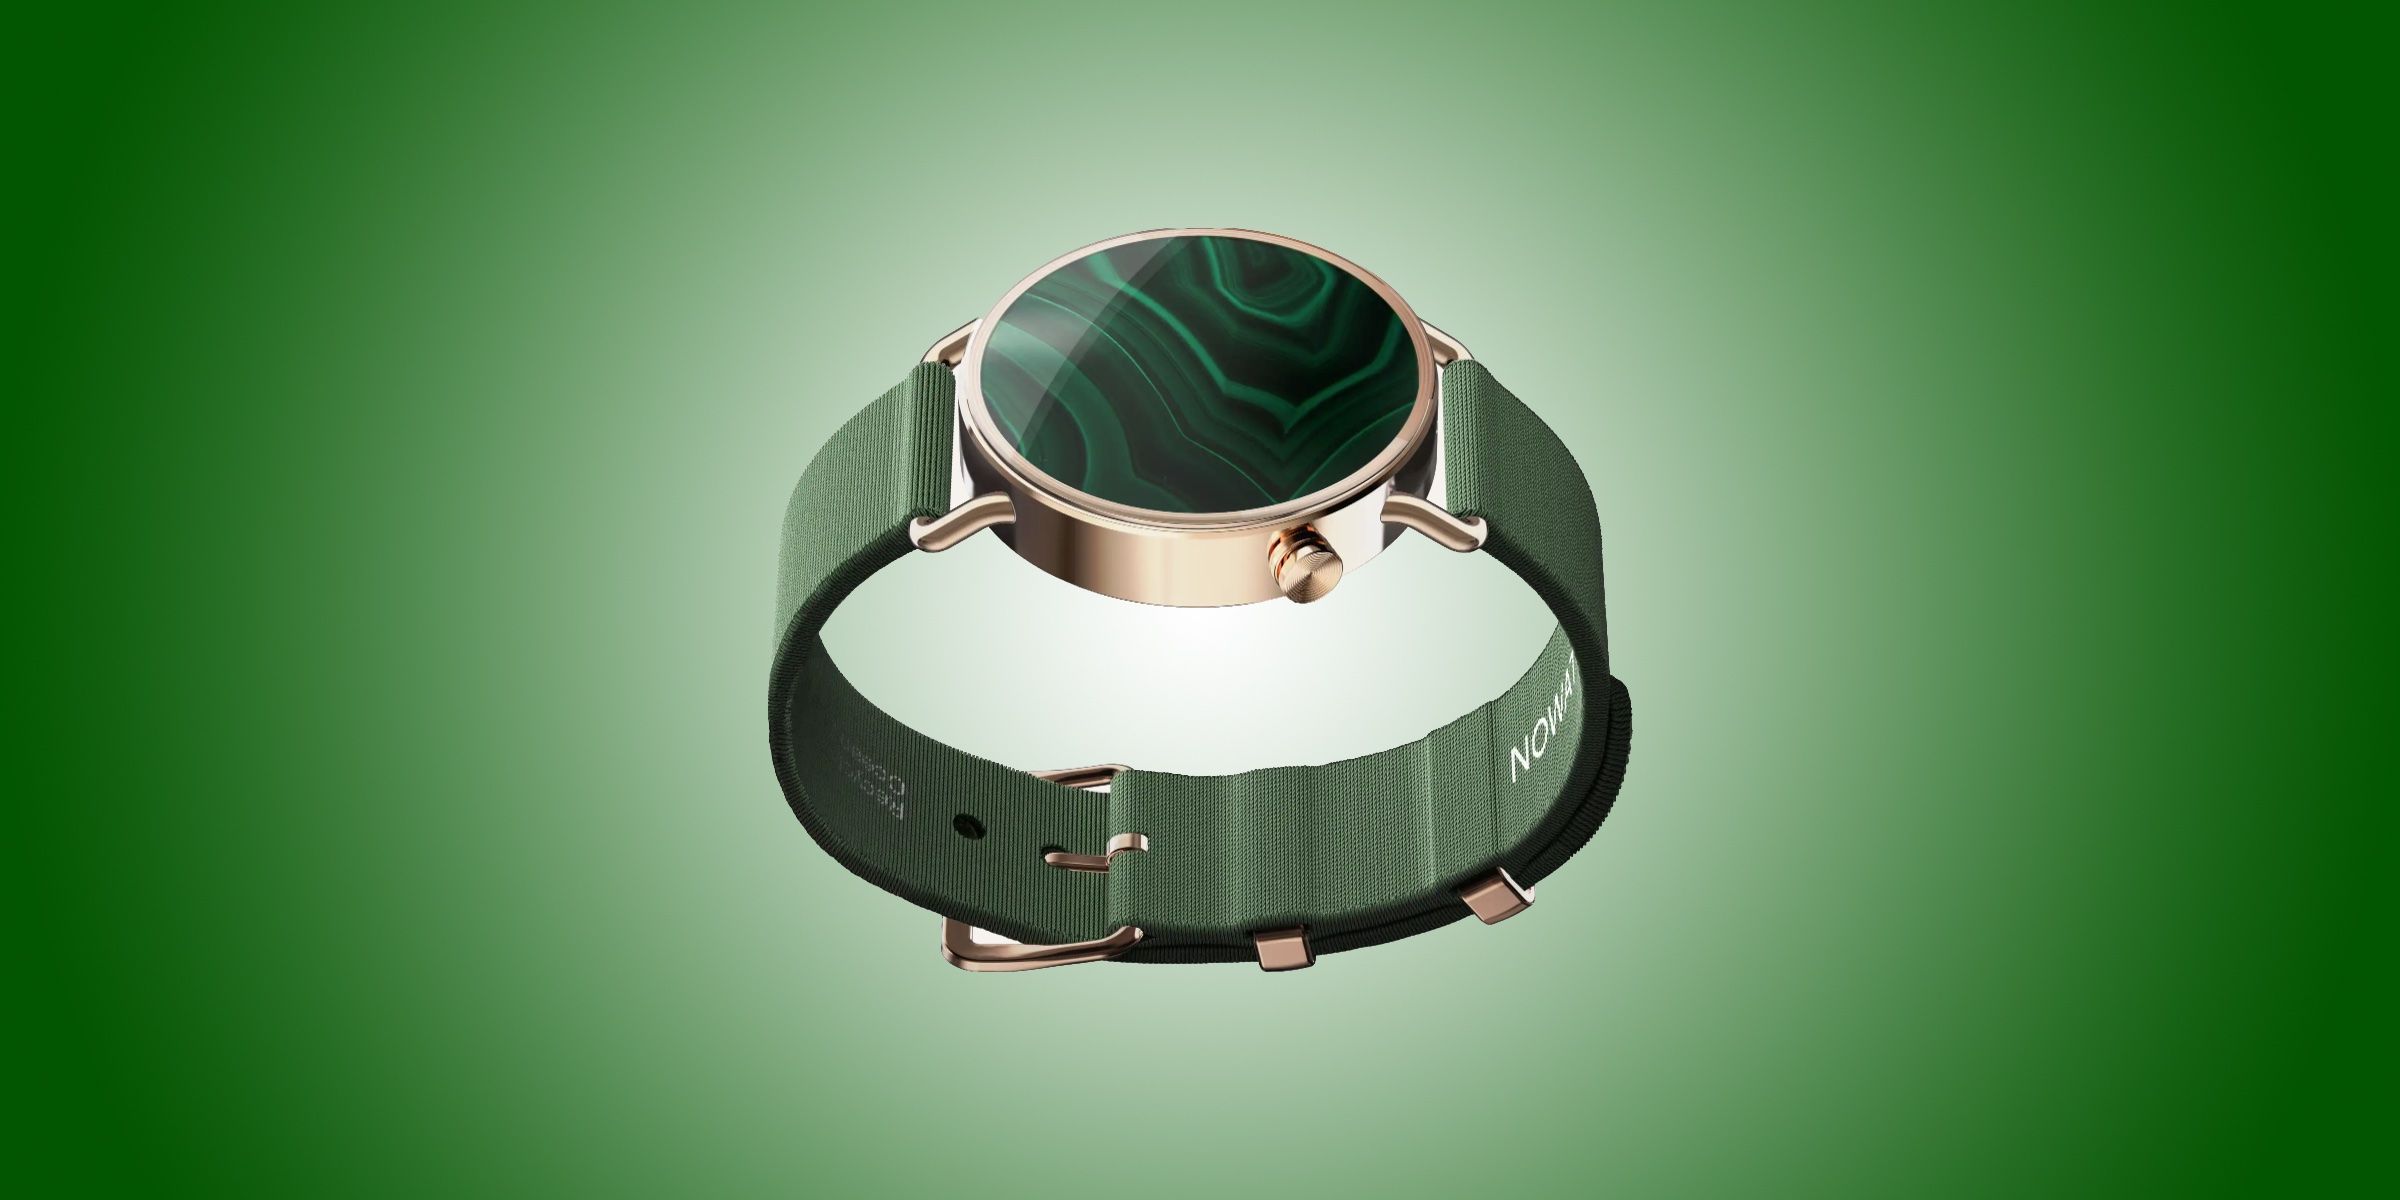 A Nowatch with a green disk and matching green strap.